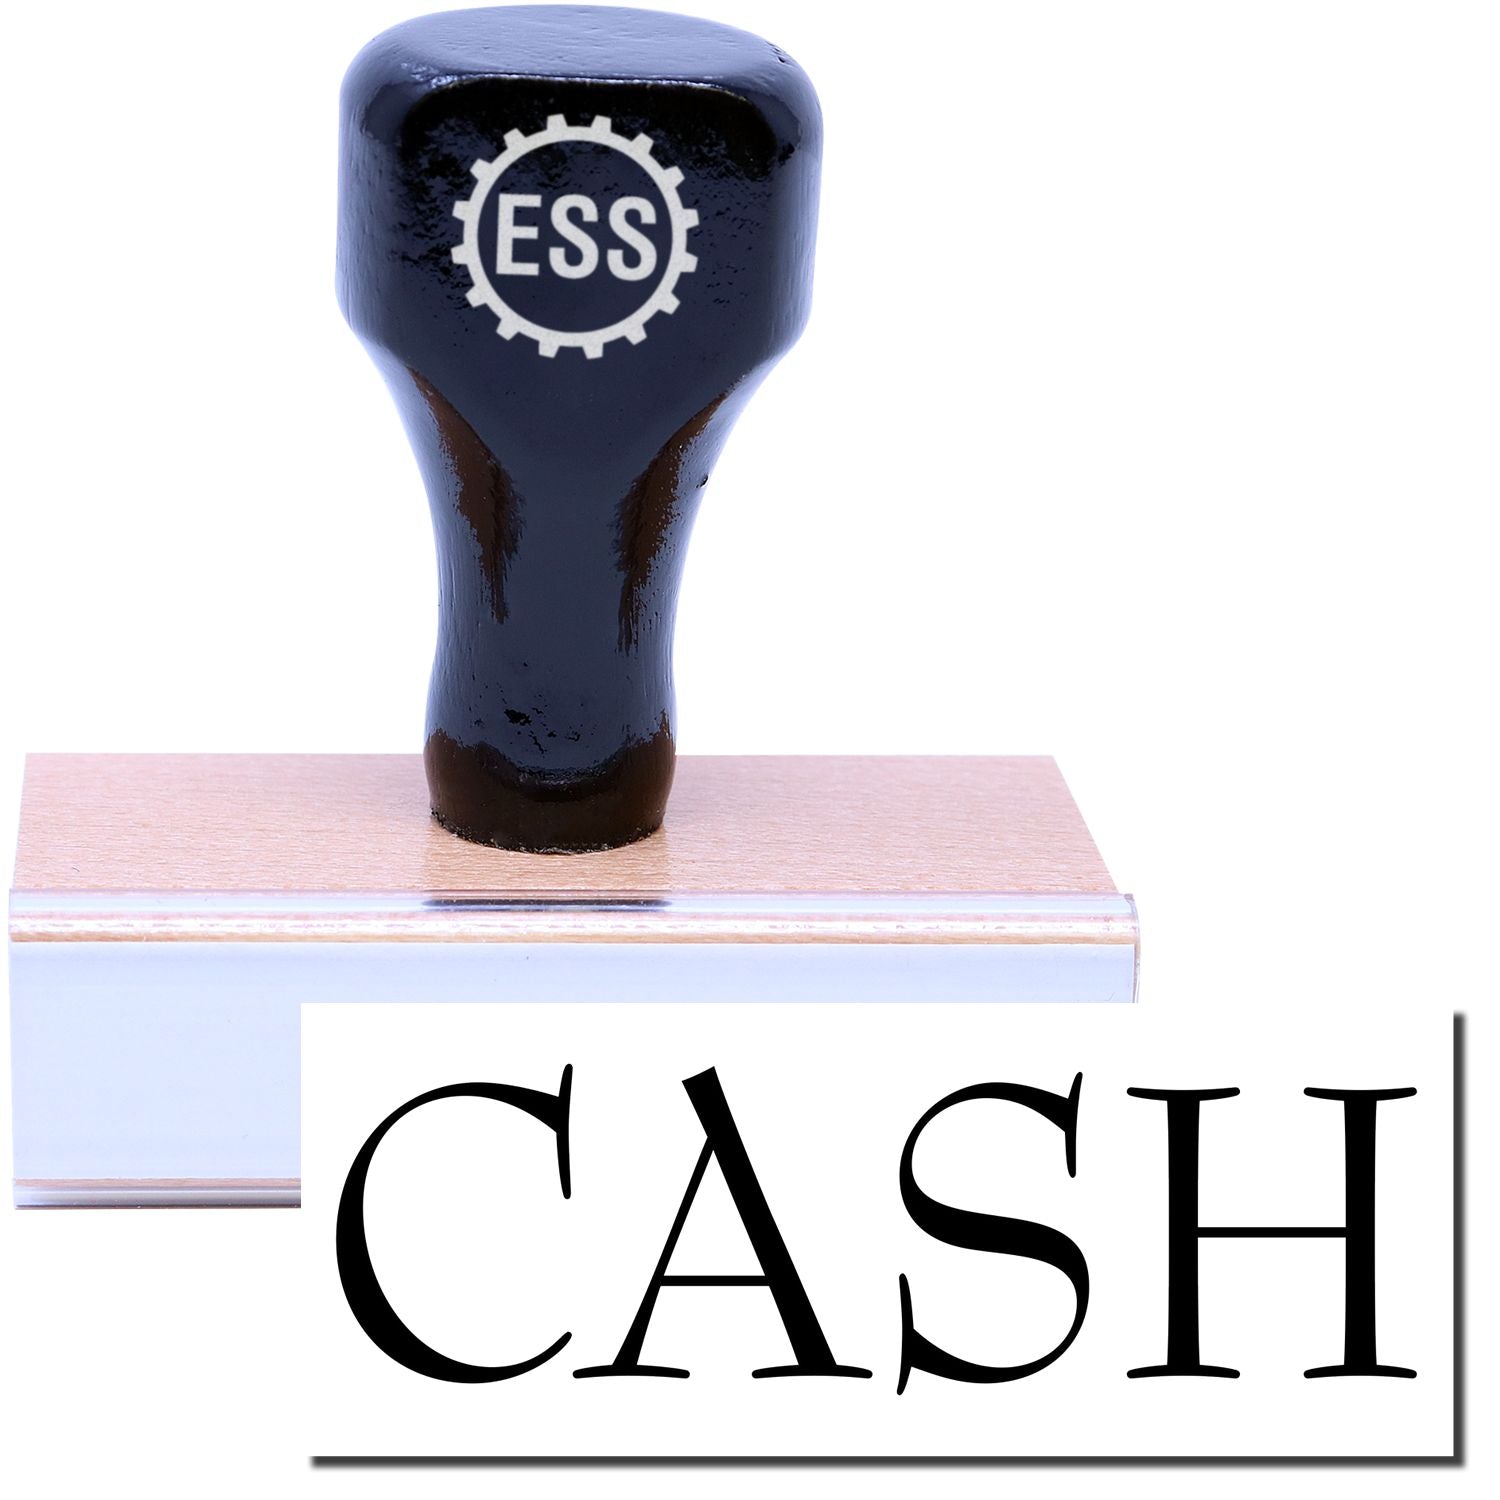 A stock office rubber stamp with a stamped image showing how the text "CASH" is displayed after stamping.